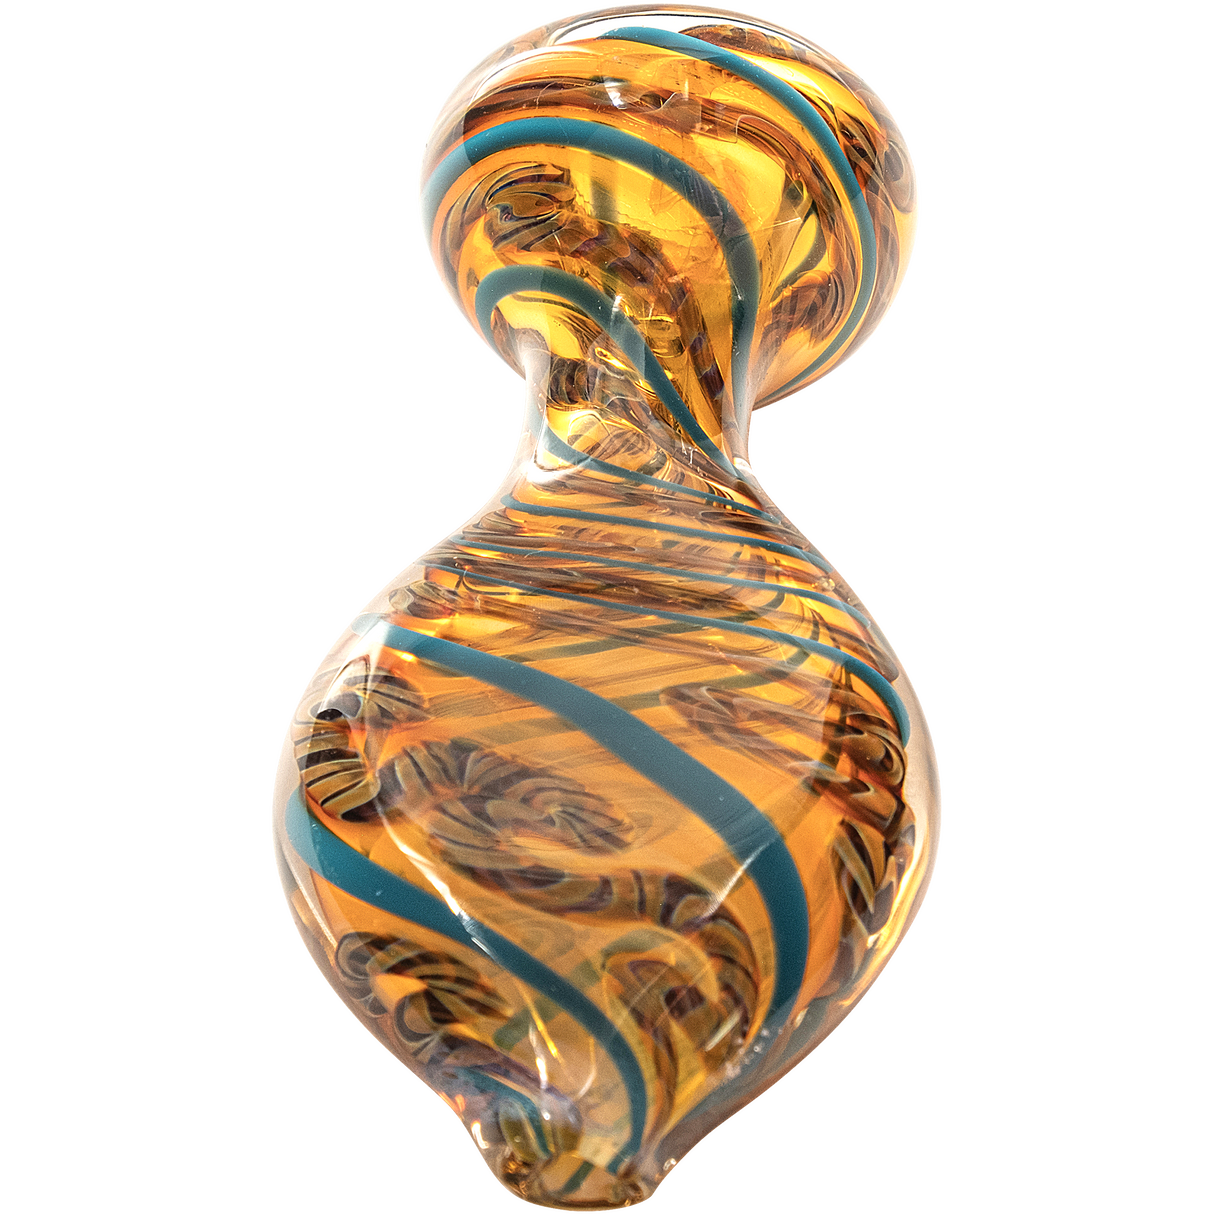 LA Pipes "Flat Belly" Inside-Out Chillum, Fumed Color Changing Glass, Medium Size